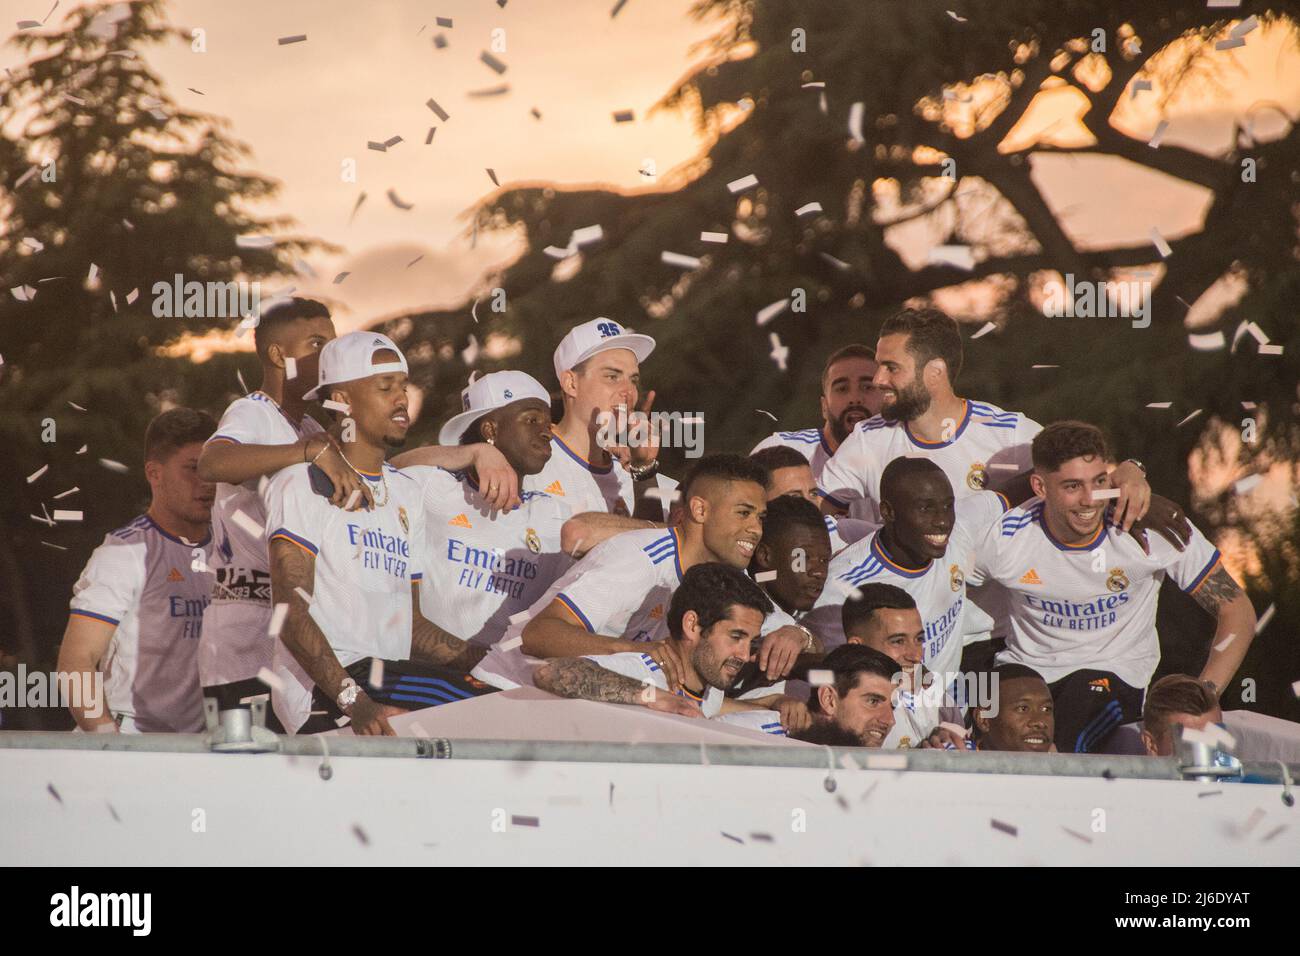 Real Madrid has proclaimed the League this Saturday after defeating Real Club Deportivo Espanyol by four goals to nil. The goals from Rodrygo, twice, Marco Asensio and Karim Benzema